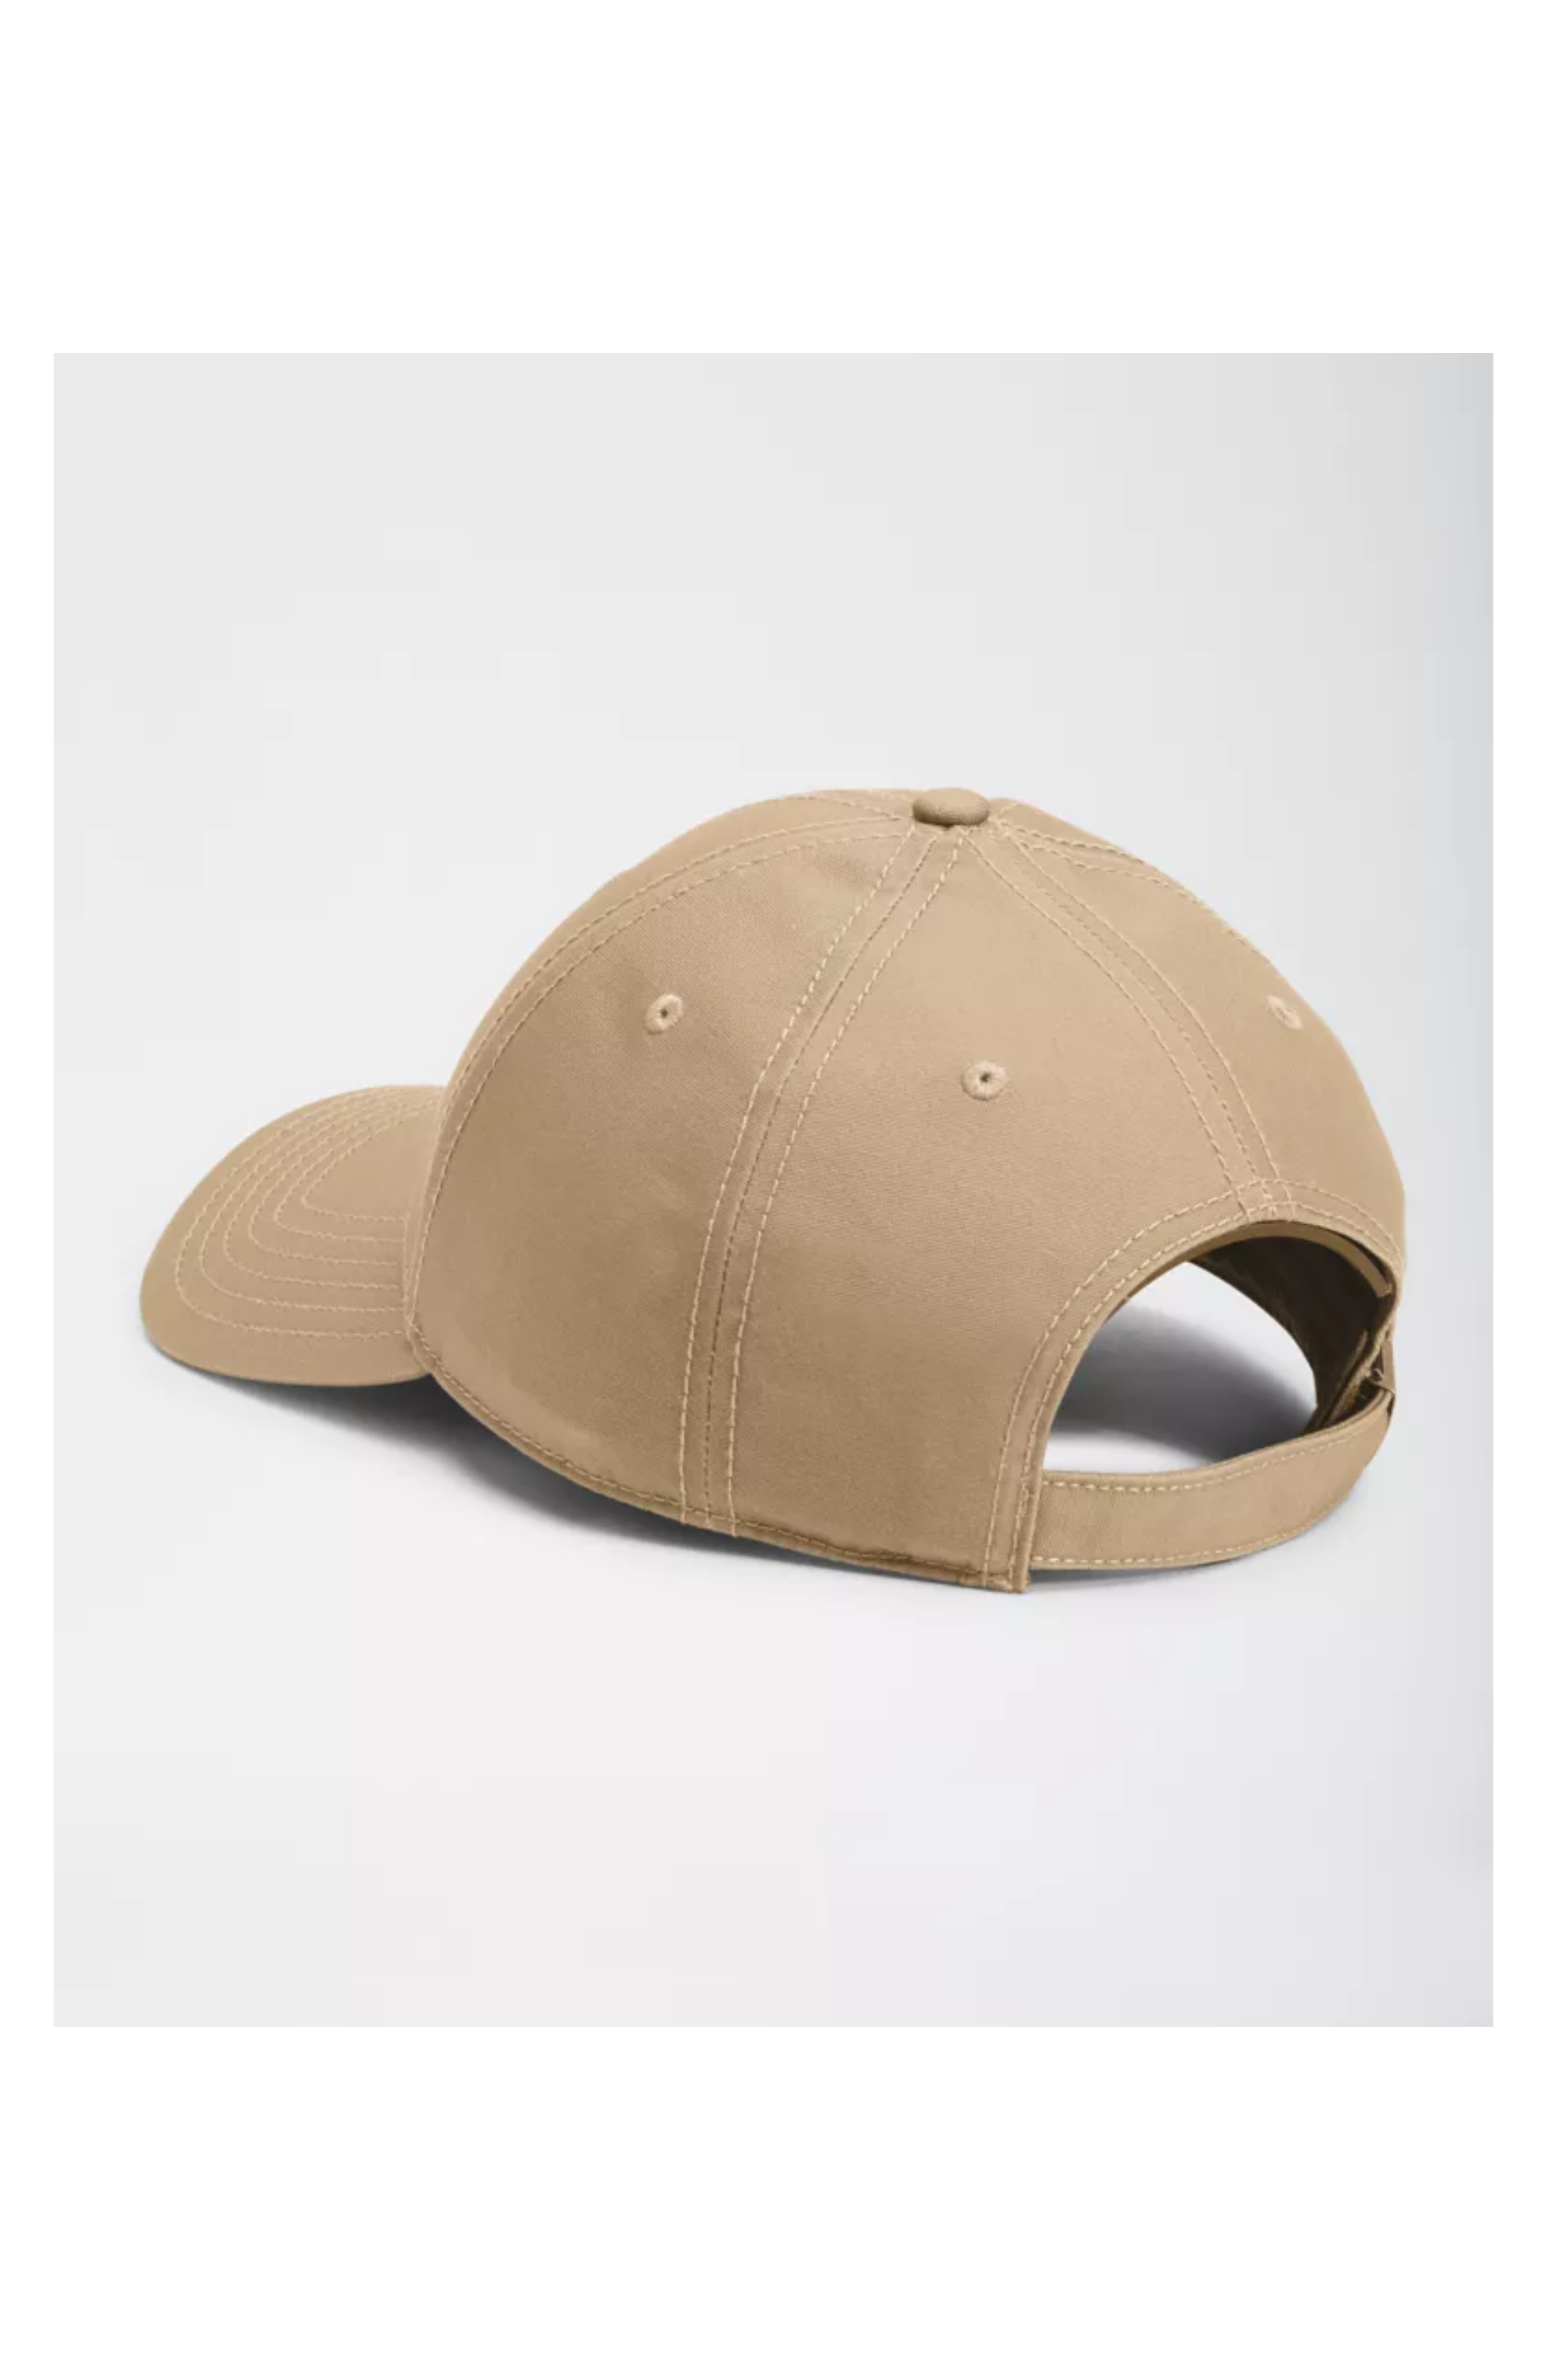 RECYCLED – CLASSIC 310 NORTH FACE NF0A4VSV HAT 66 Rosemont